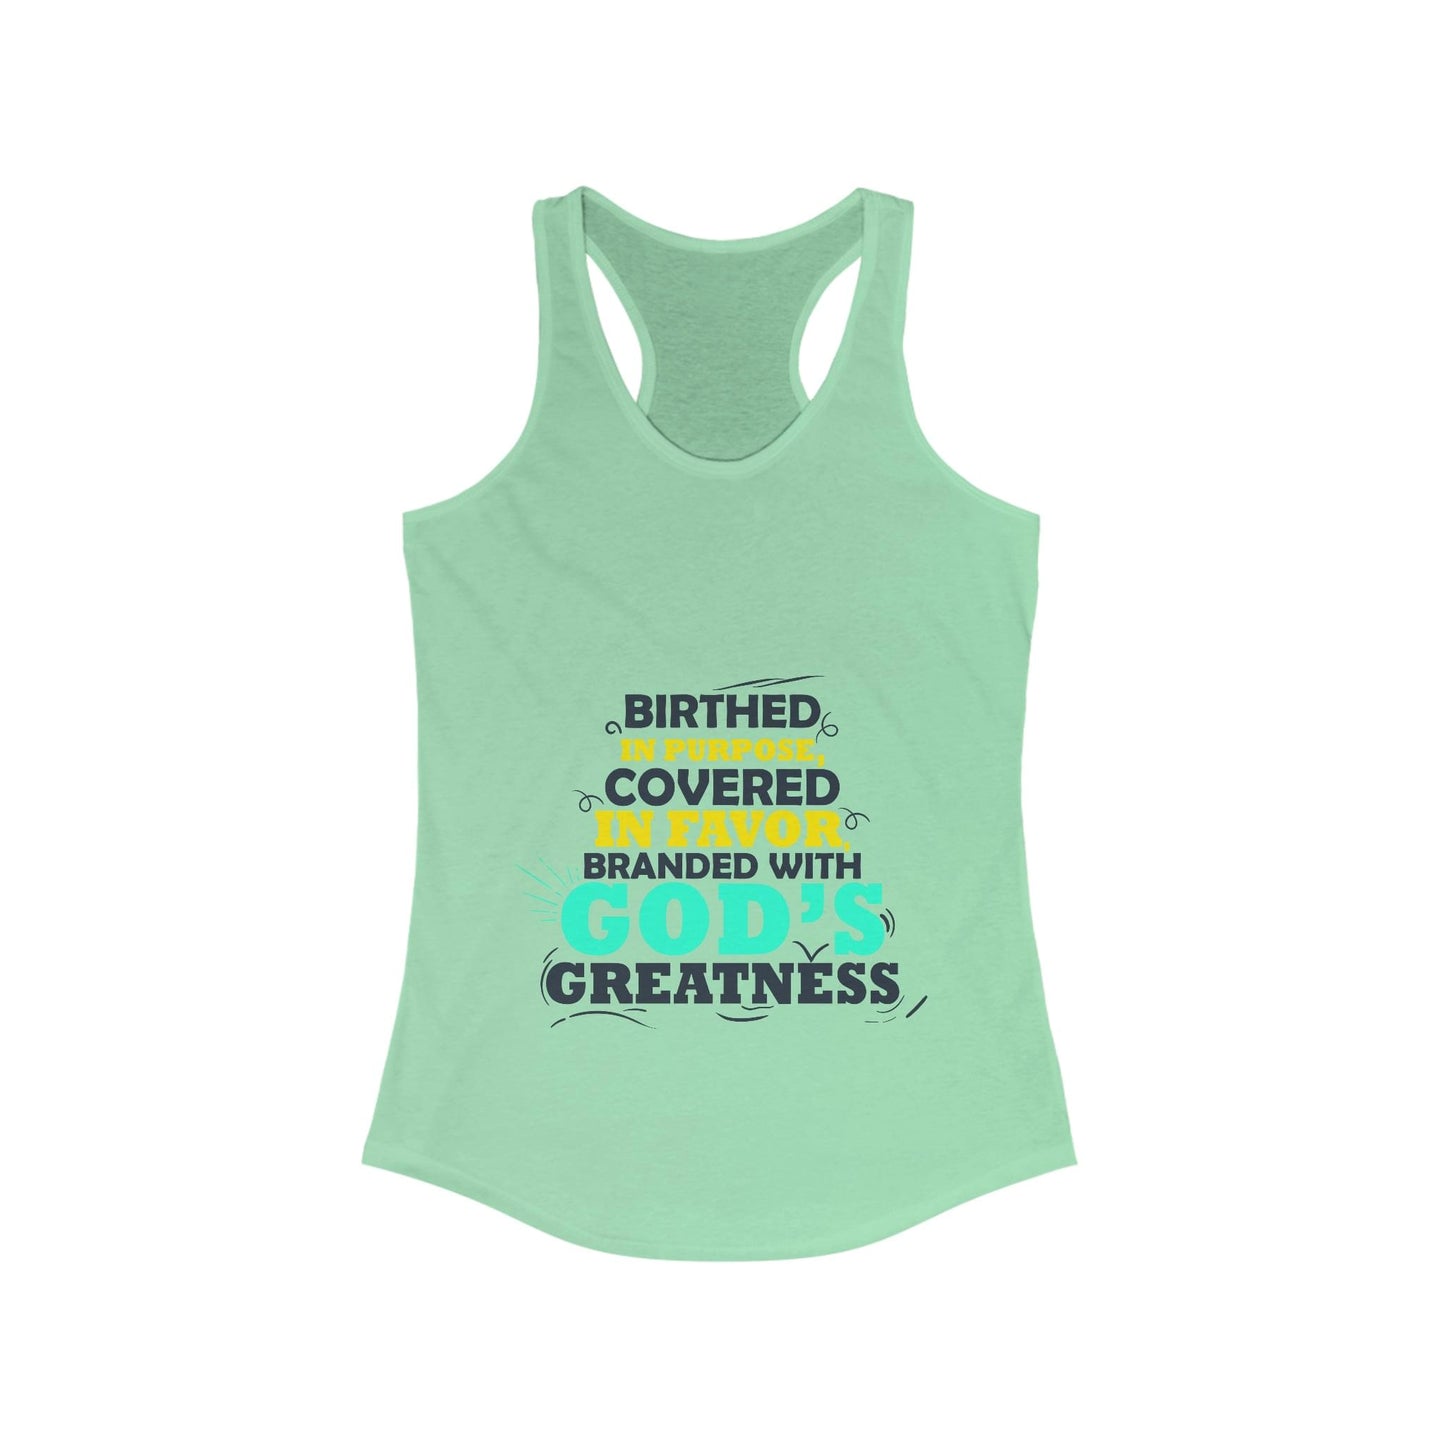 Birthed In Purpose, Covered in Favor, Branded With God's Greatness Slim Fit Tank-top